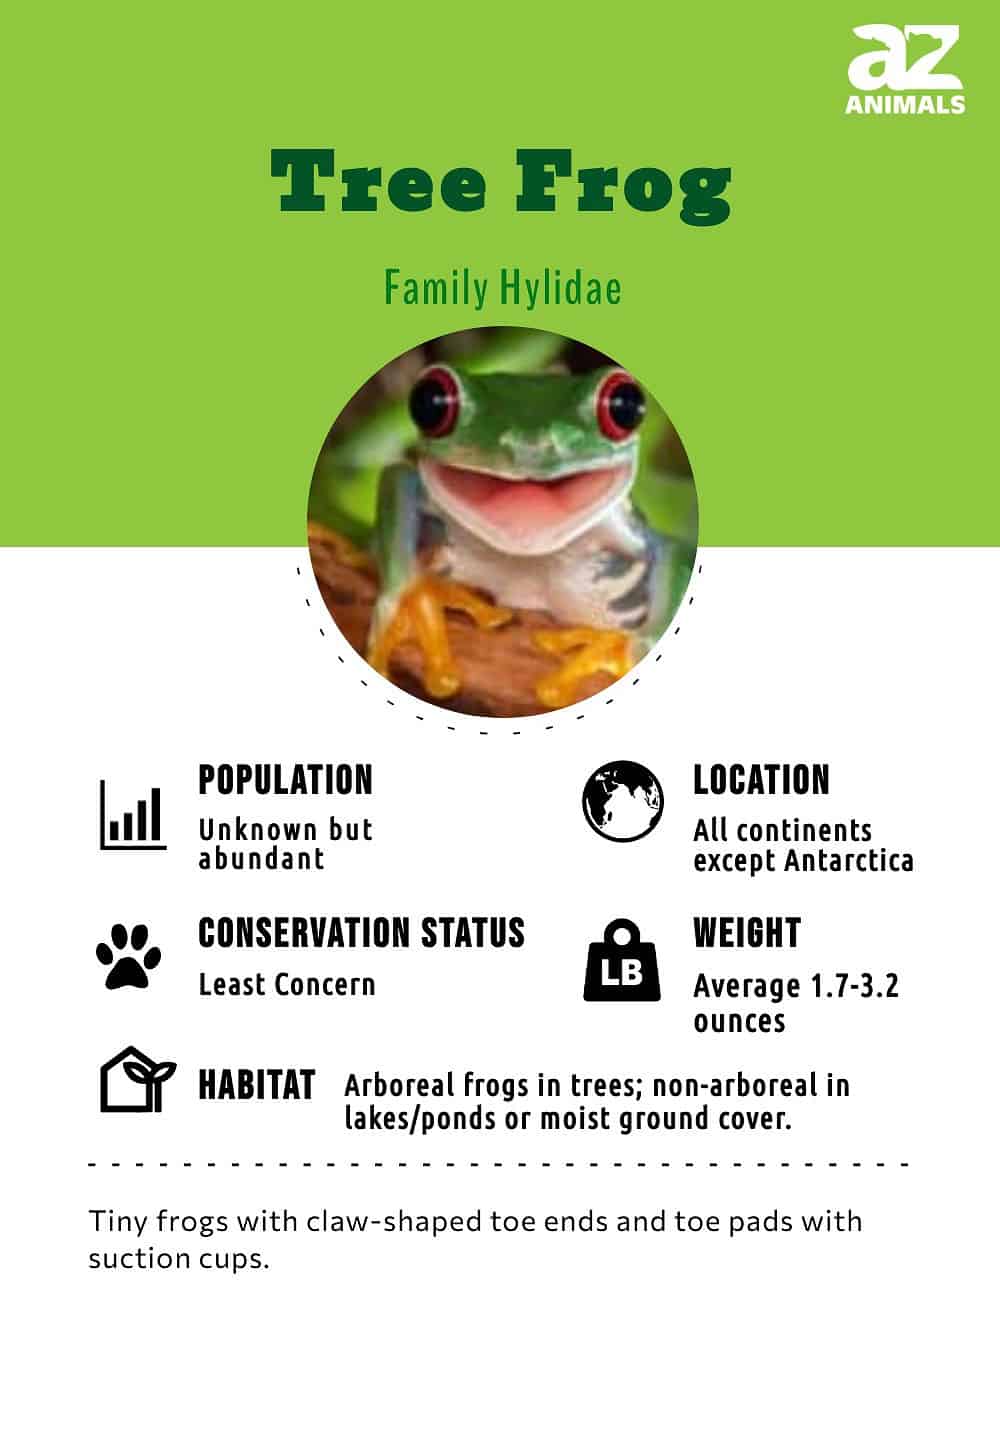 Tree Frog Animal Facts - A-Z Animals